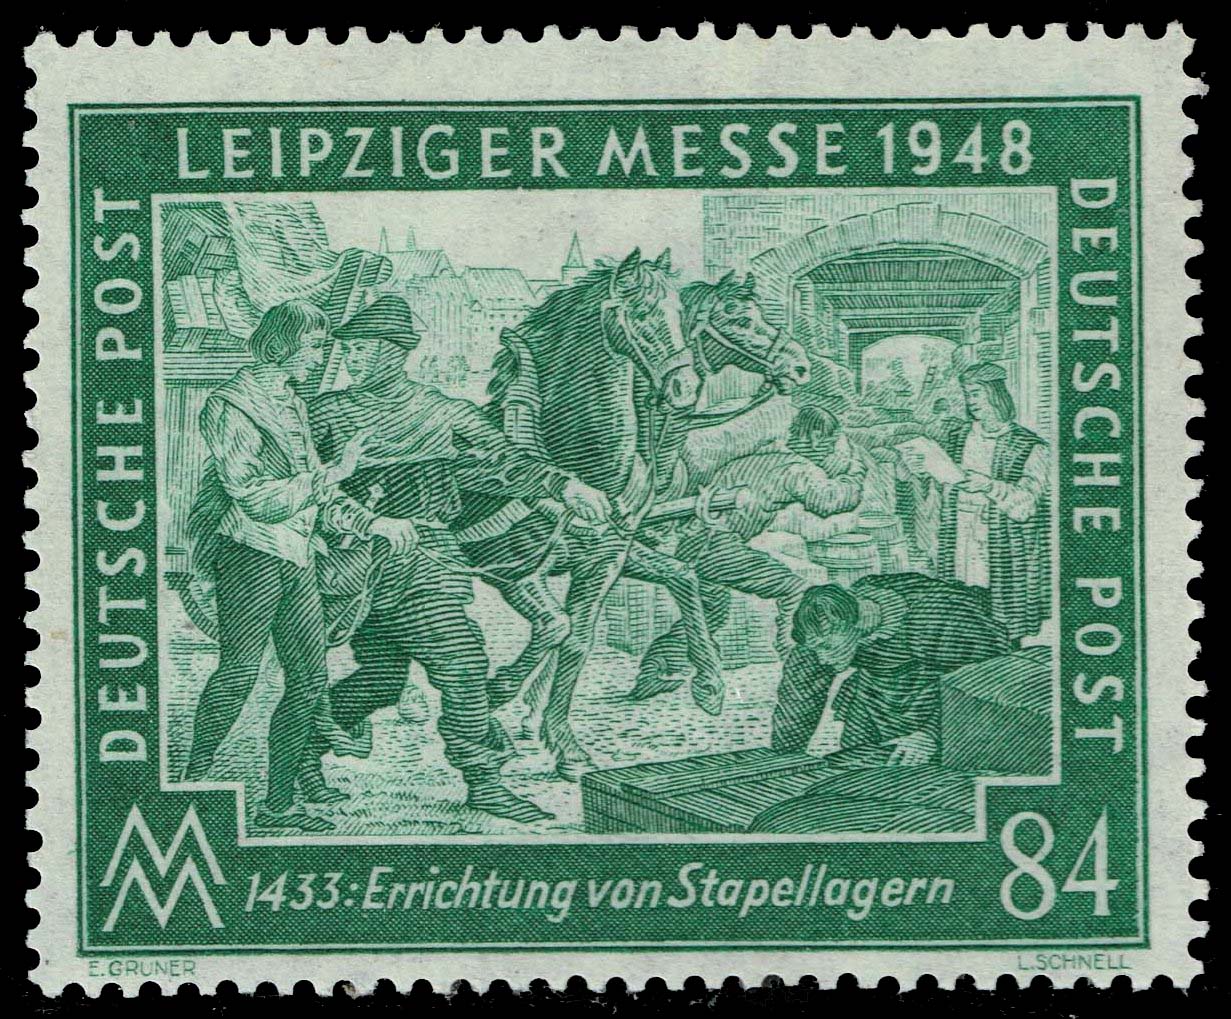 Germany #583 Arranging Stock of Merchandise; MNH - Click Image to Close